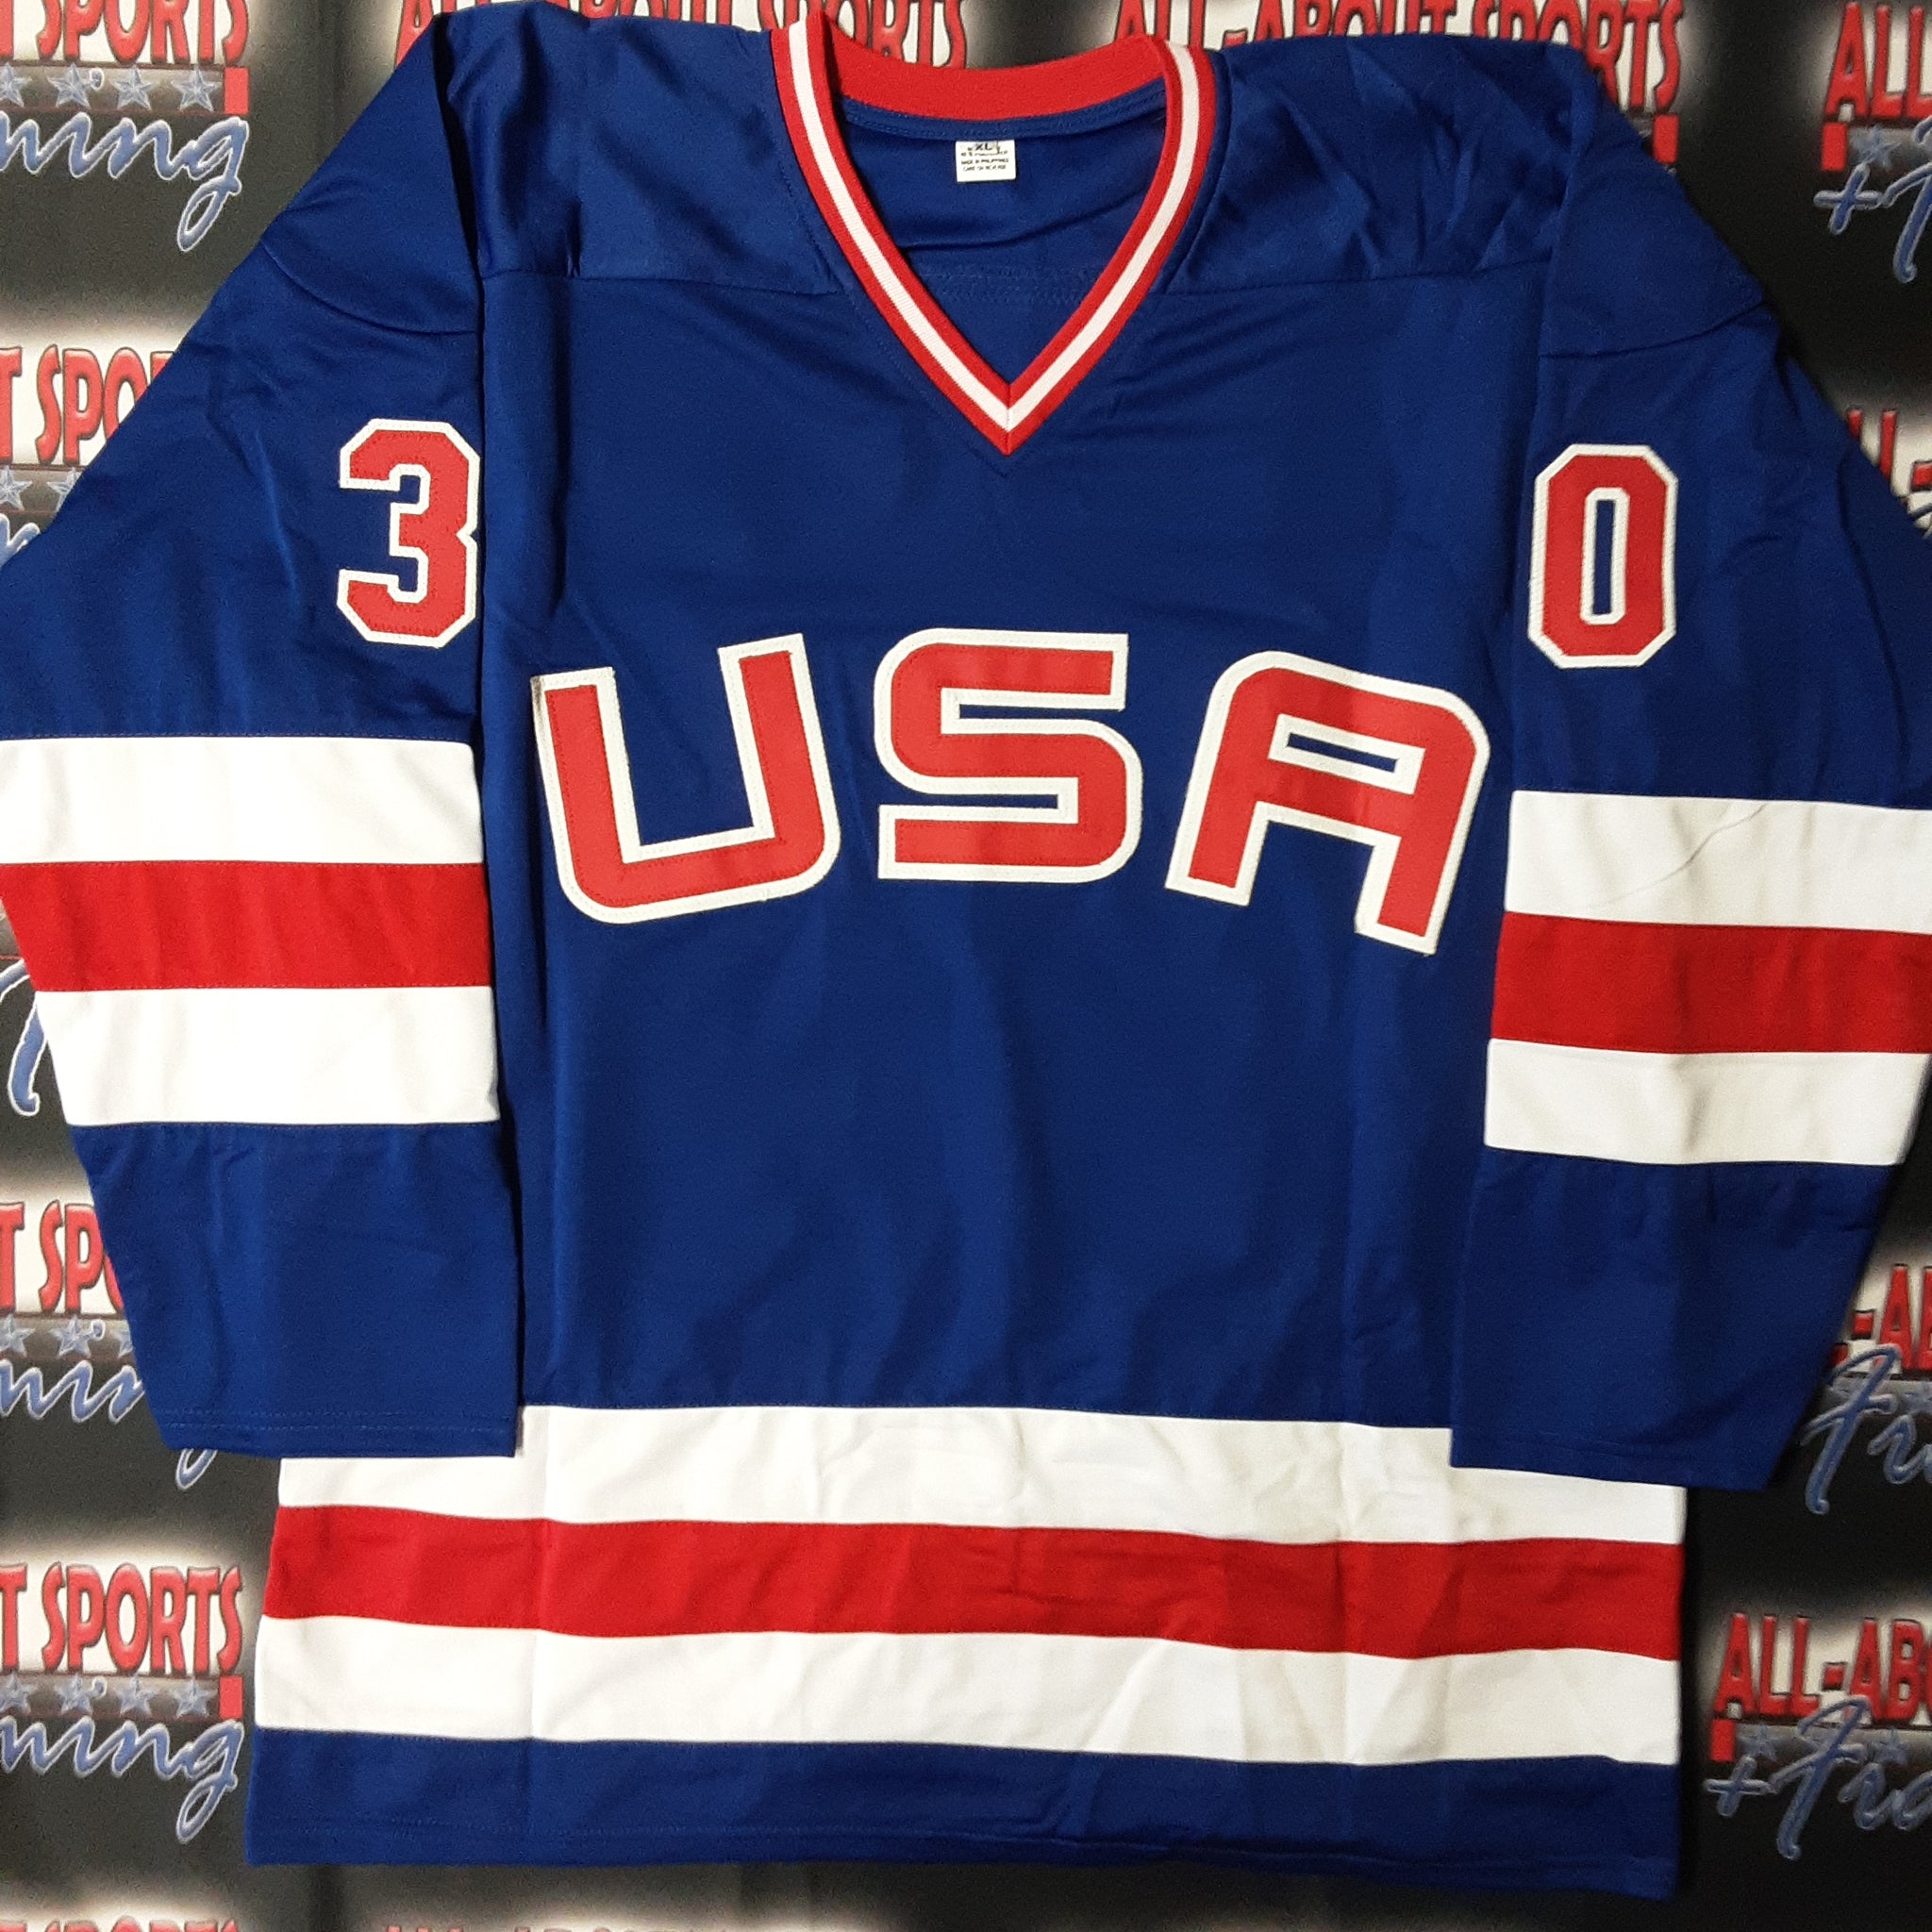 Jim Craig Authentic Signed Pro Style Jersey Autographed Beckett